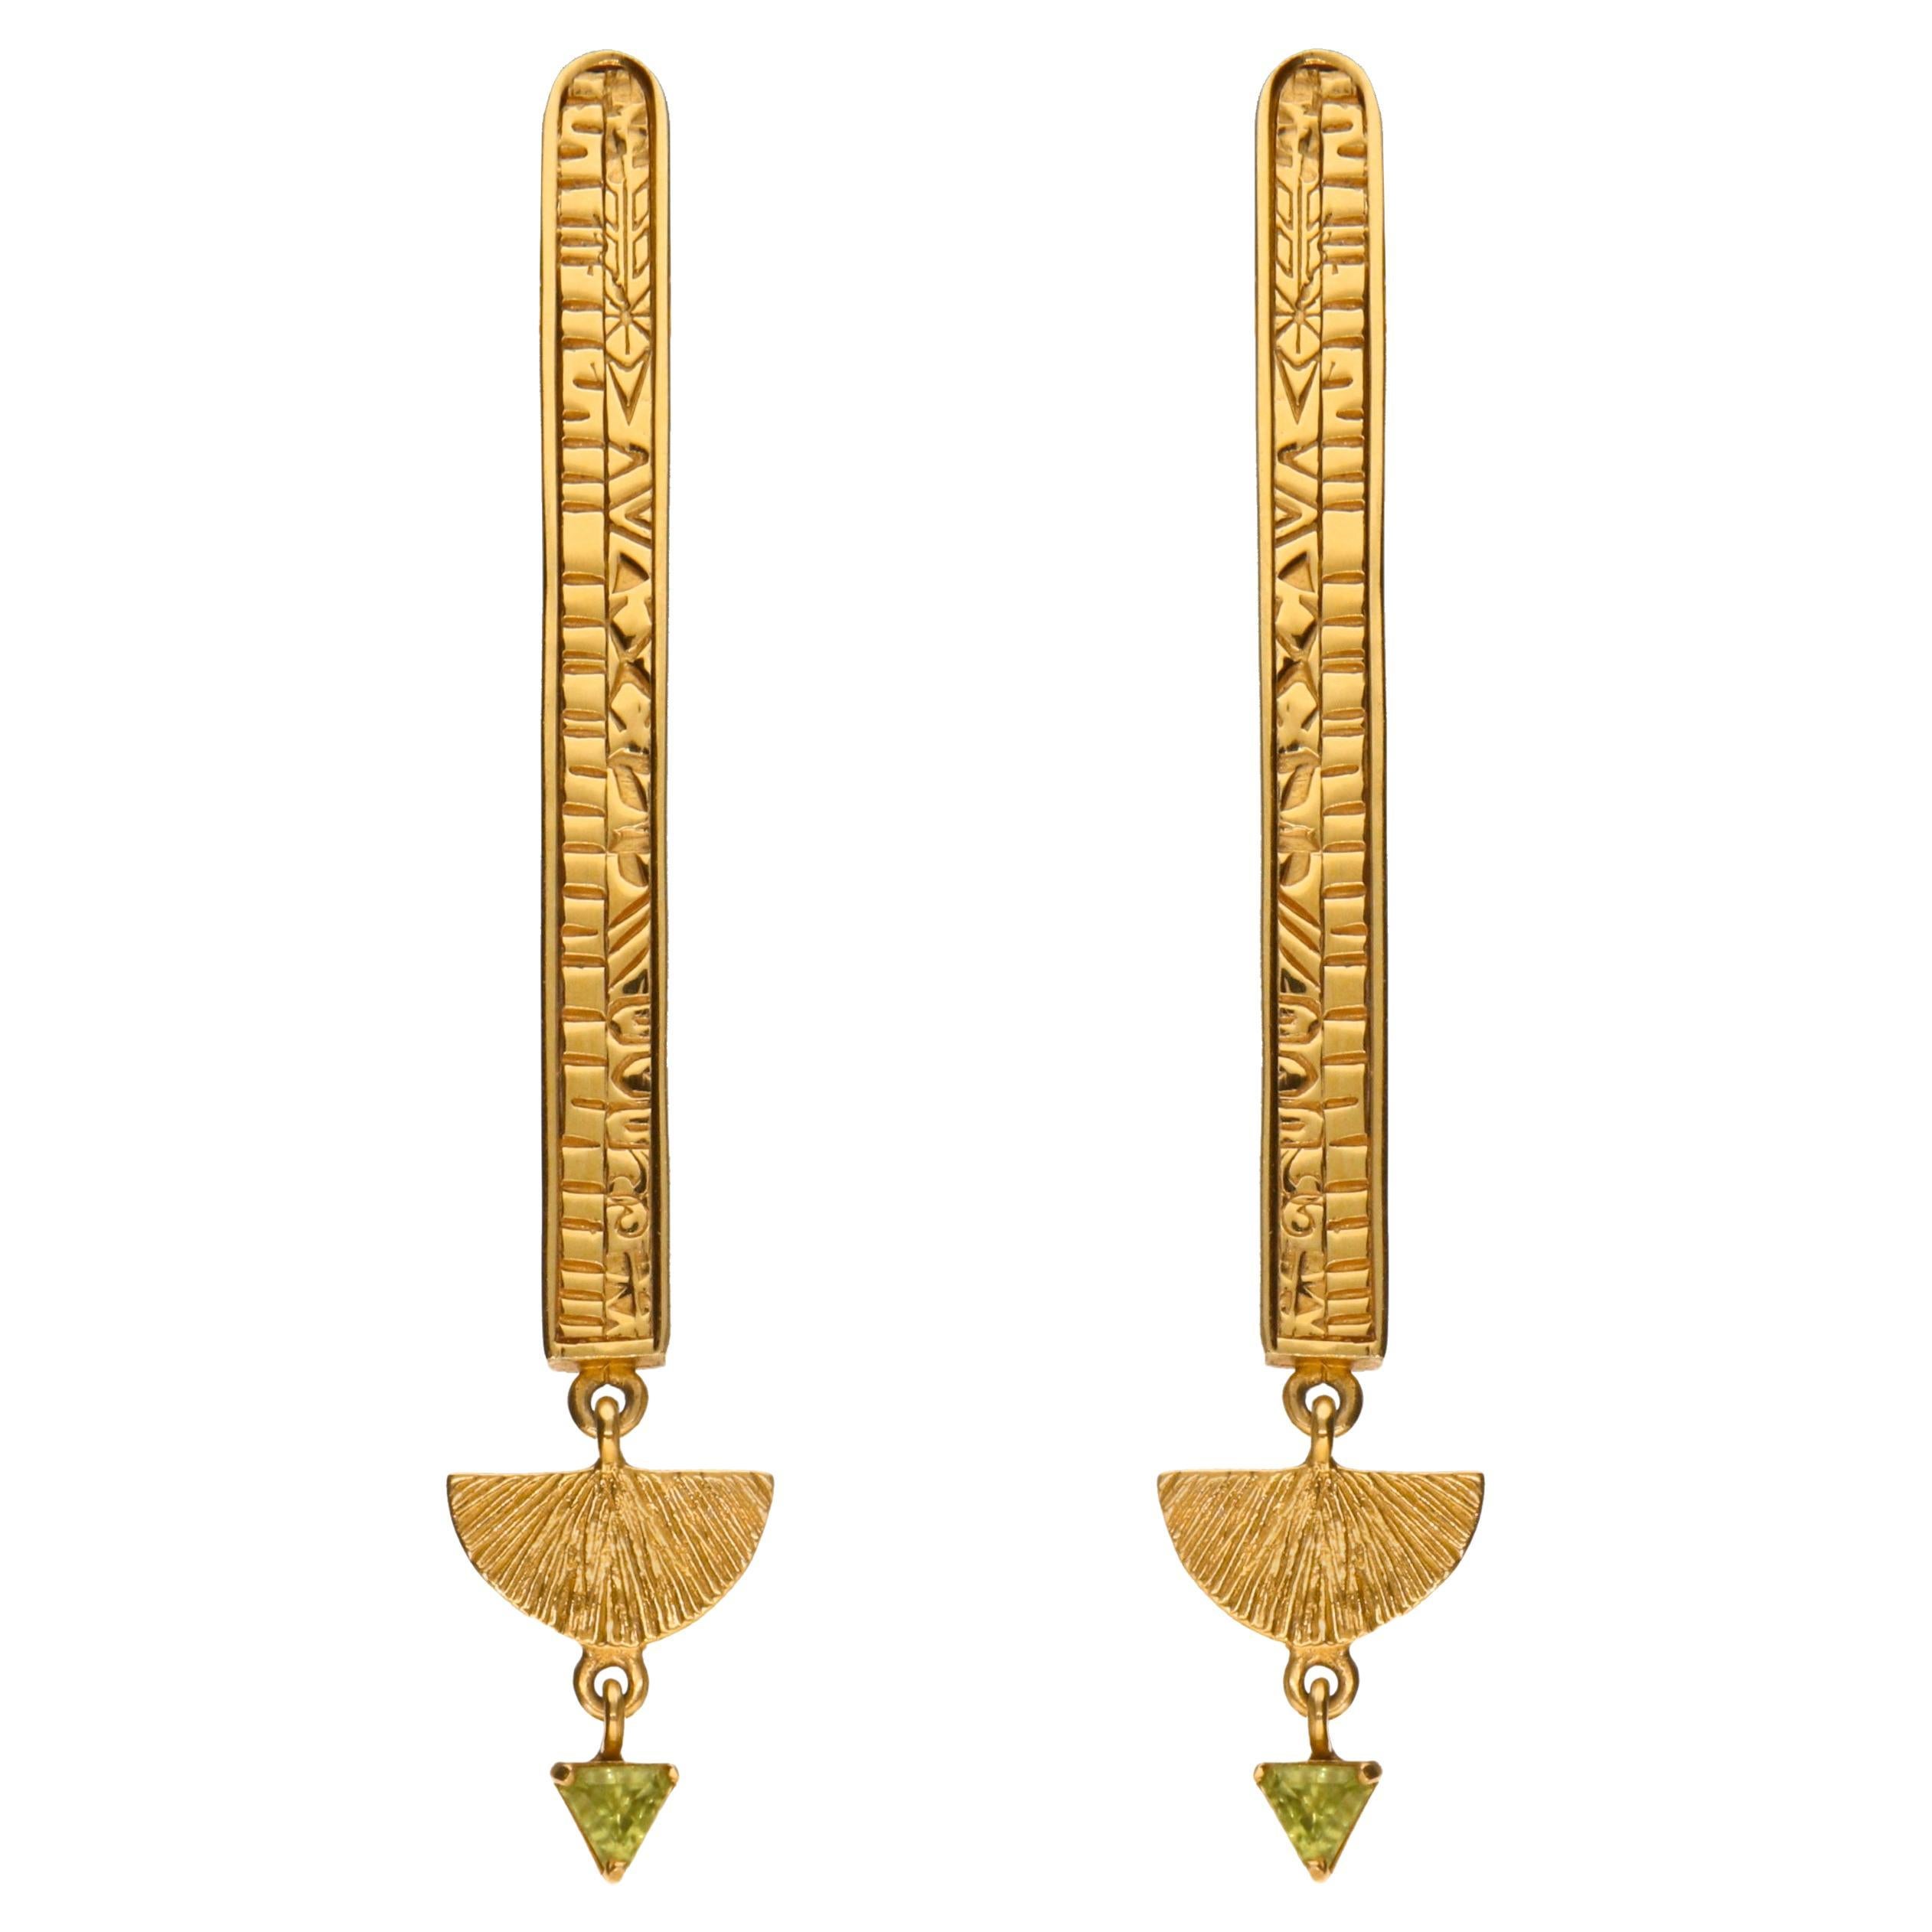 Cleo Earrings in 14k Yellow Gold: an Ode to Ancient Egypt For Sale